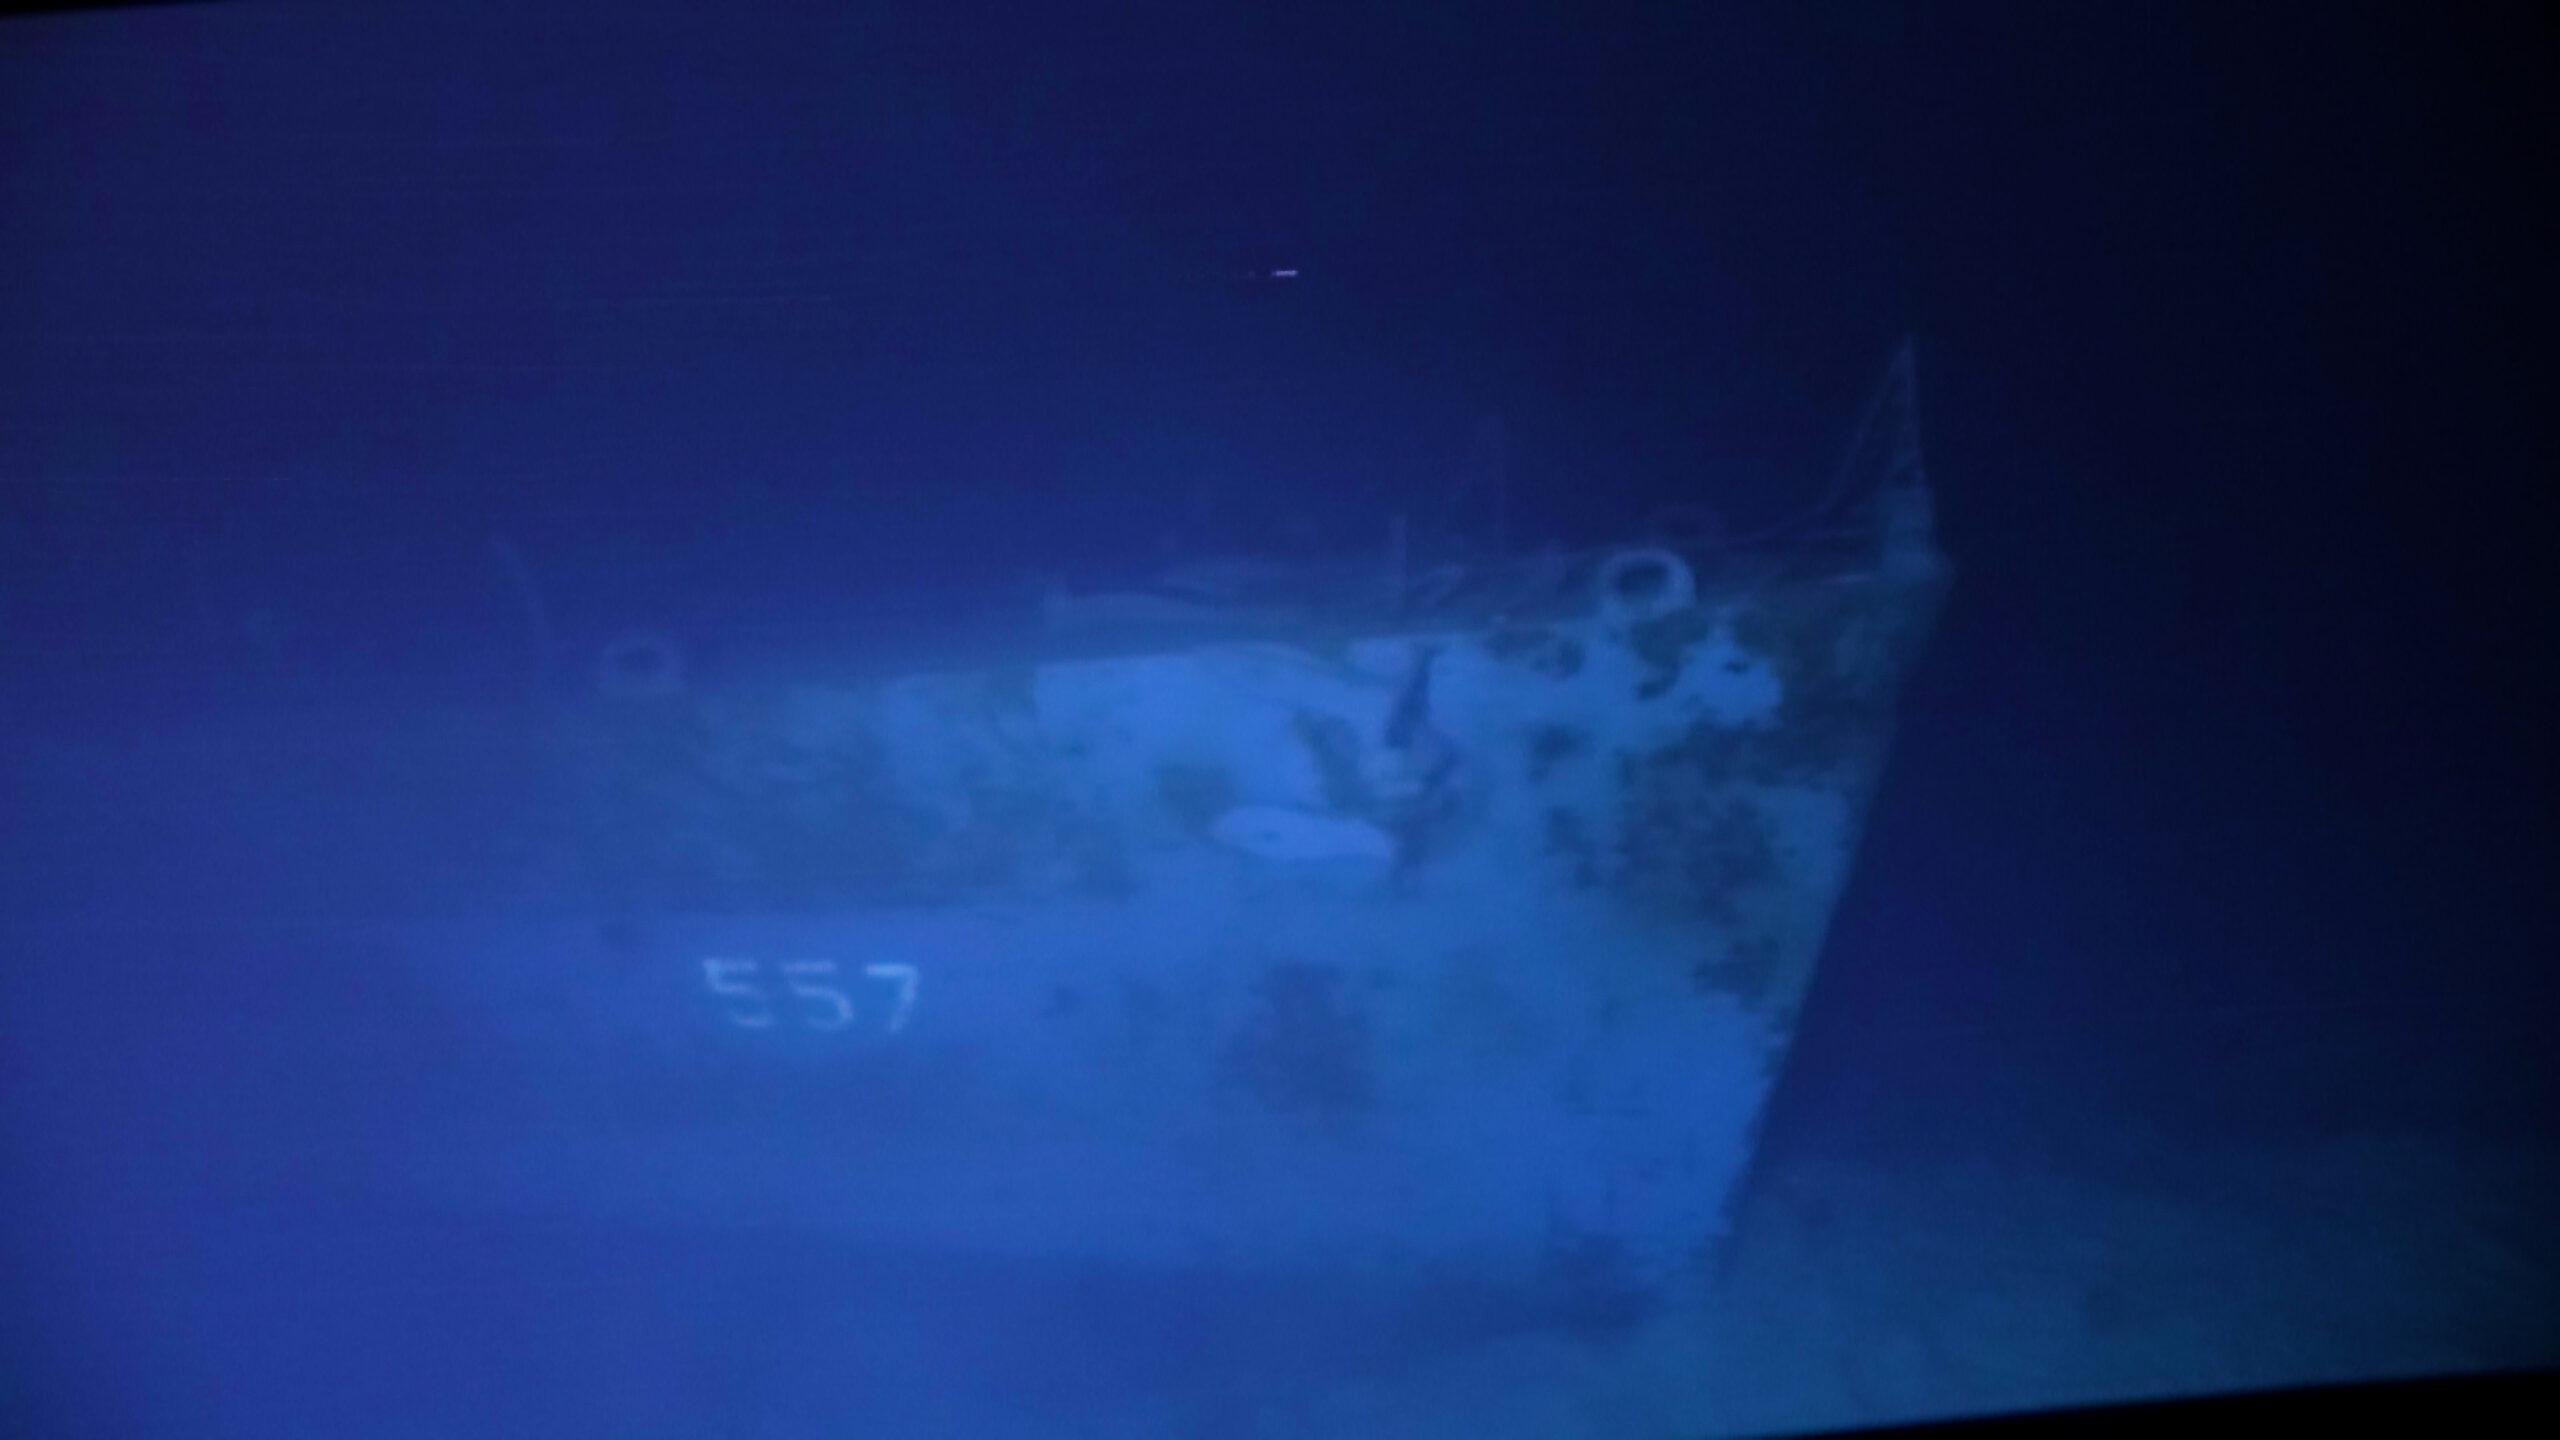 The hull with number 557, identifying the ship as the USS Johnston.  (Image: Caladan Oceanic)